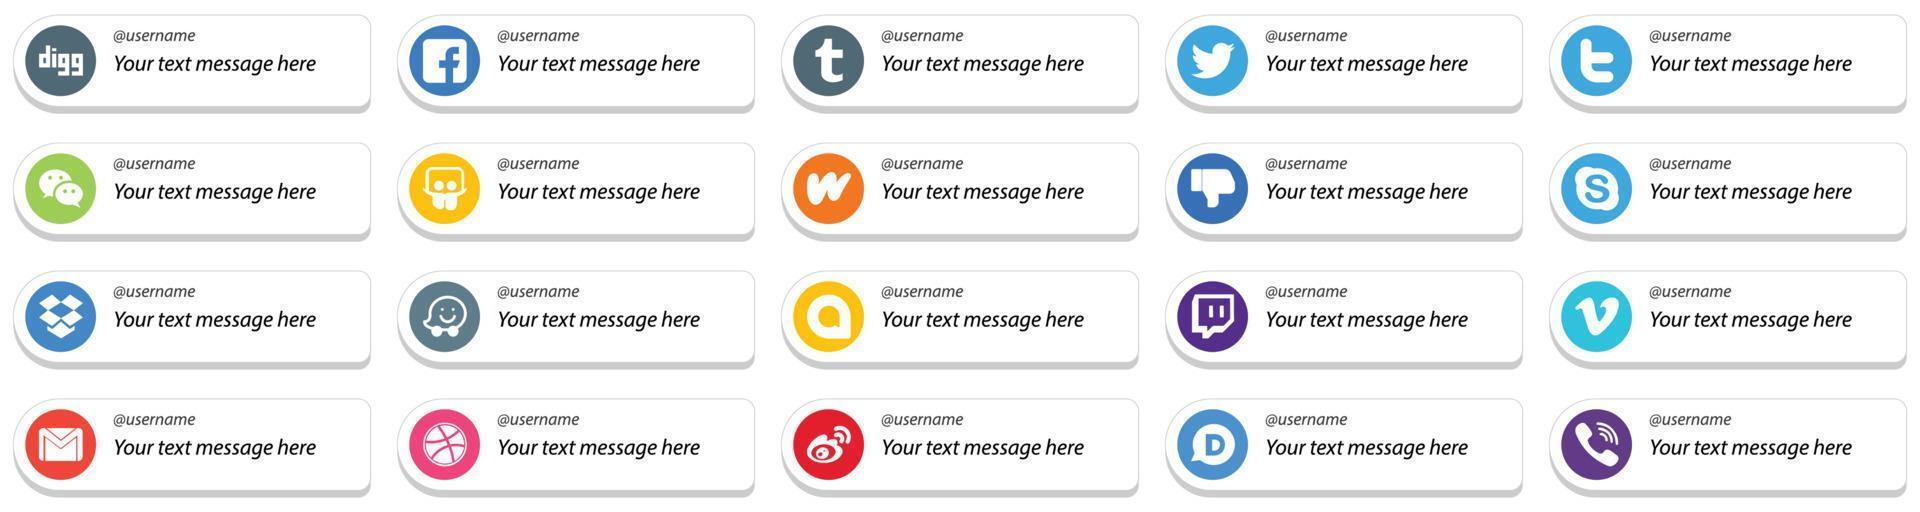 20 Follow Me Icons with Custom Message Option for Popular Social Media Platforms such as waze. chat. messenger. skype and dislike icons. Creative and eye catching vector